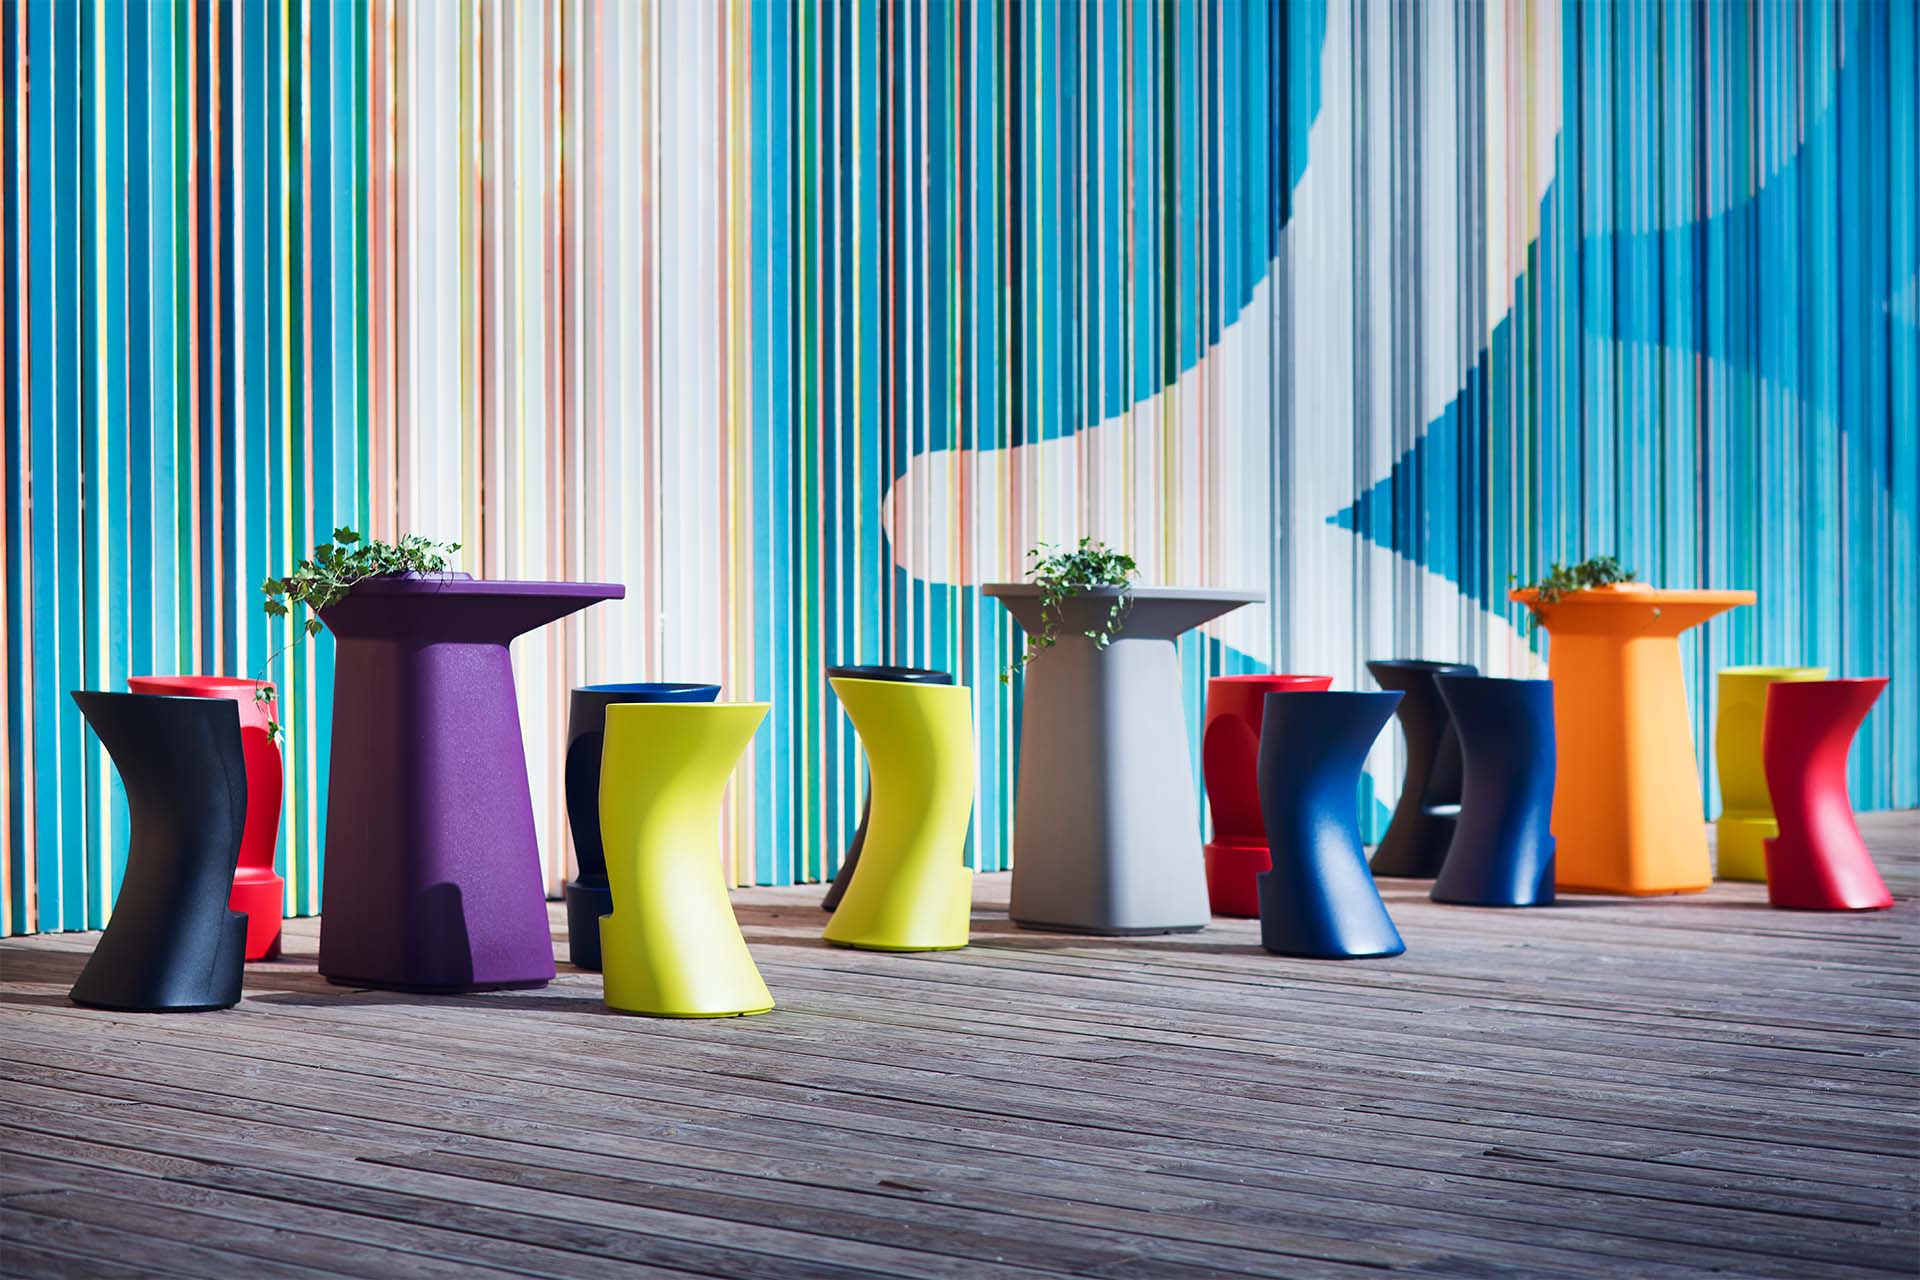 Noma outdoor stools and planters by Javier Mariscal Vondom